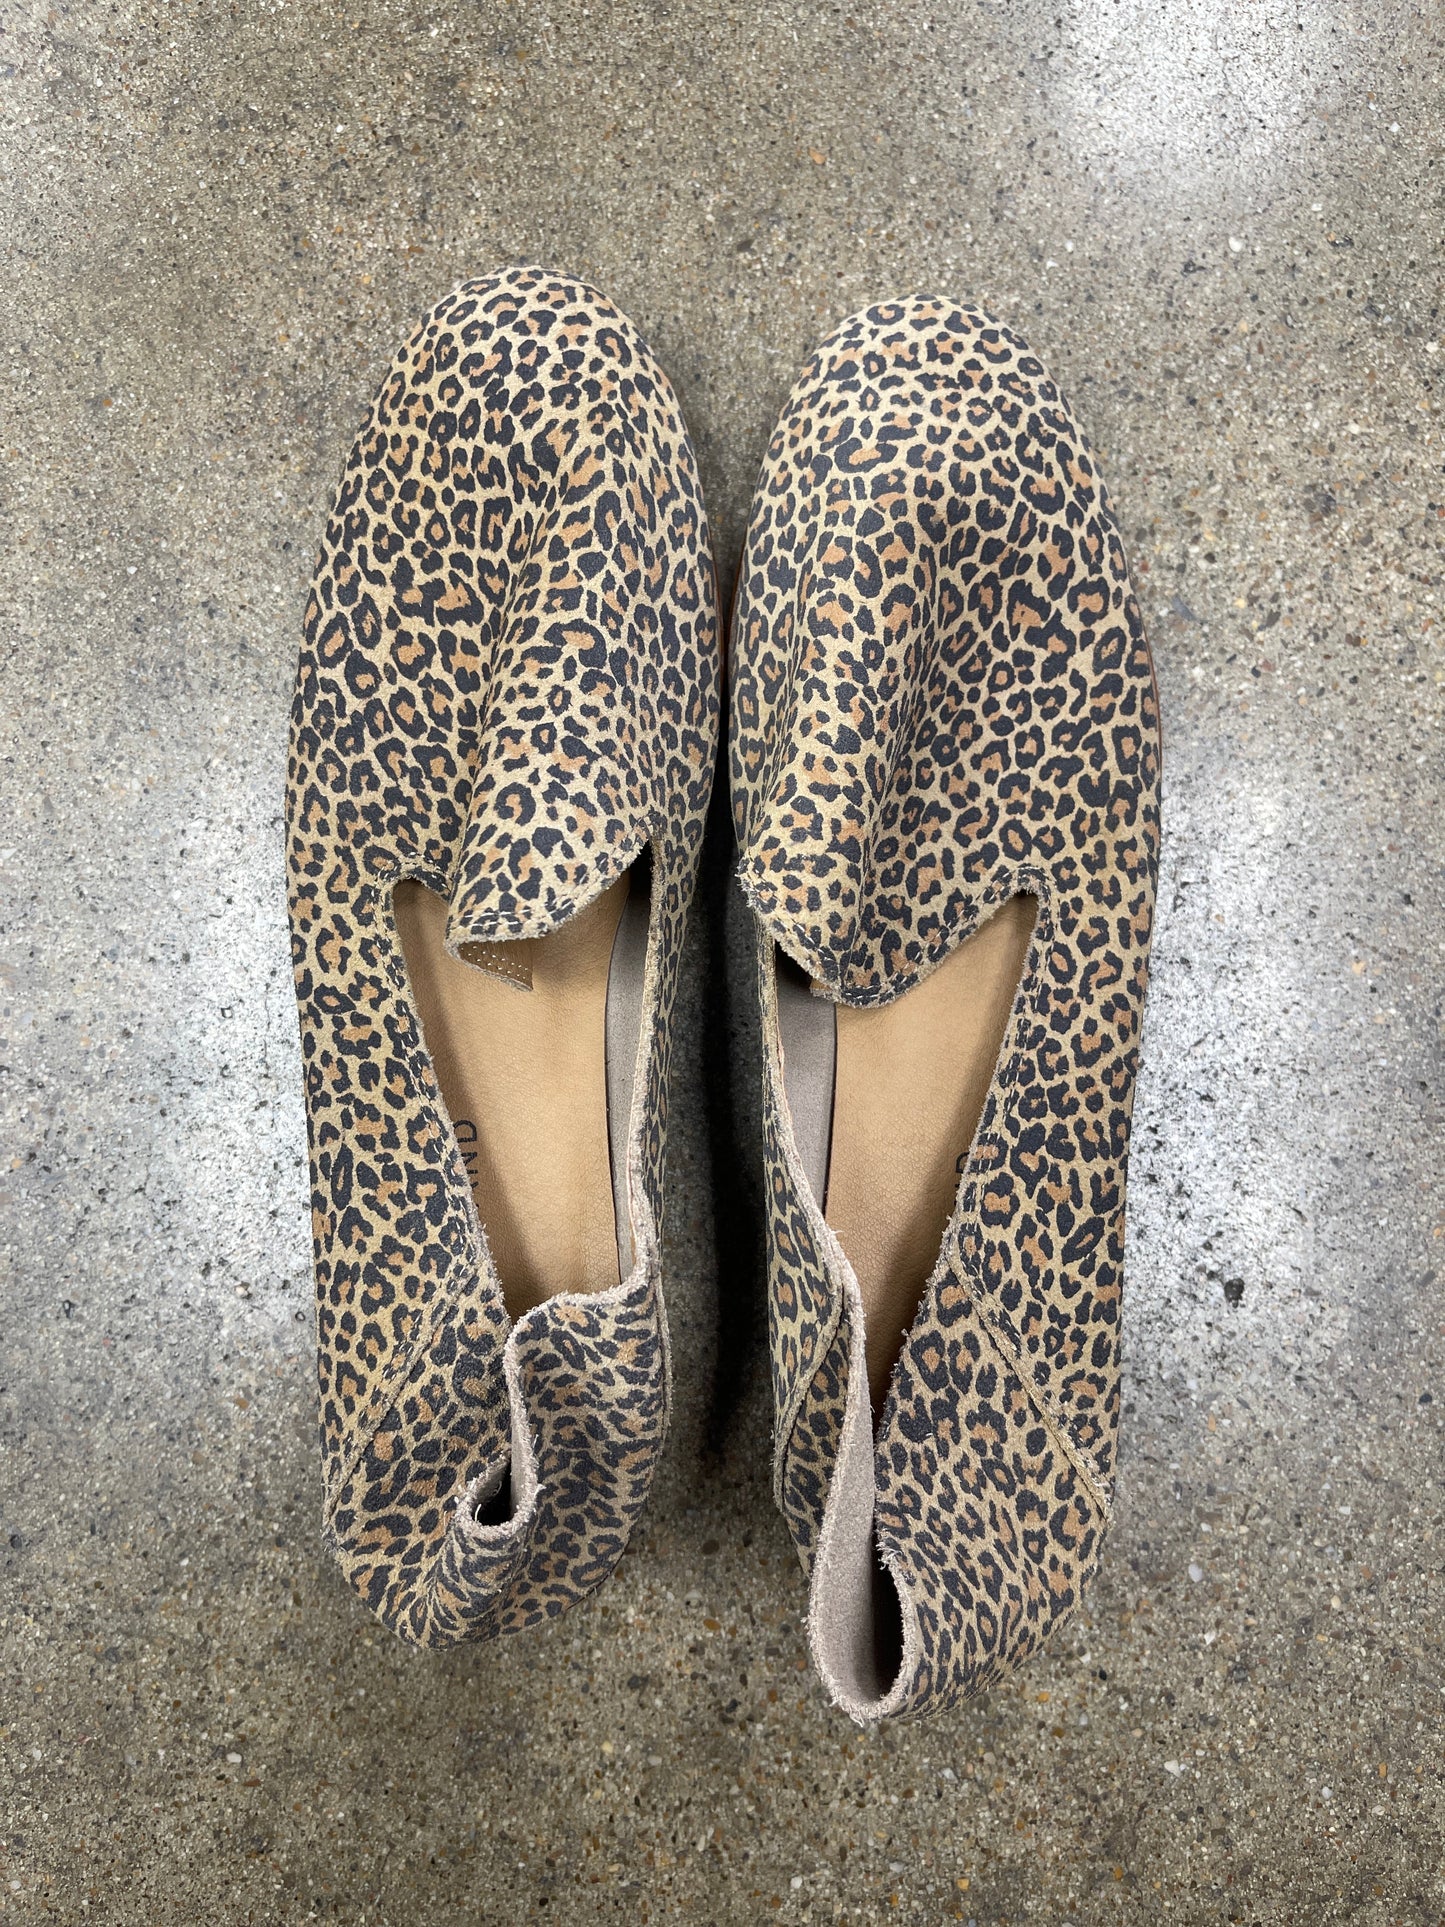 Animal Print Shoes Flats Lucky Brand, Size 9